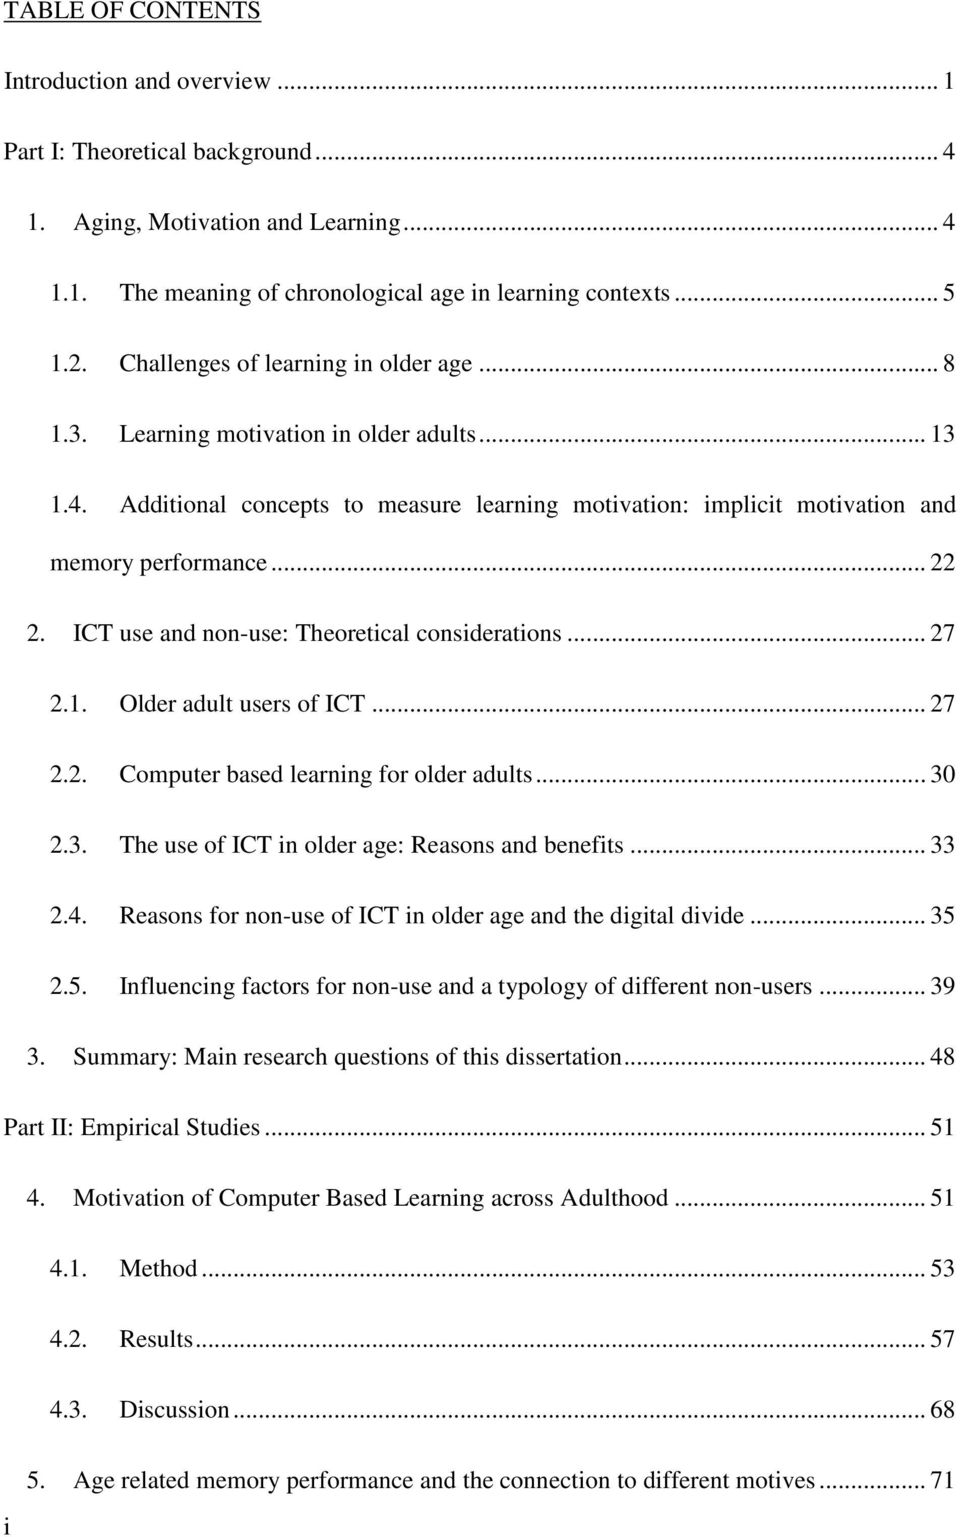 ICT use and non-use: Theoretical considerations... 27 2.1. Older adult users of ICT... 27 2.2. Computer based learning for older adults... 30 2.3. The use of ICT in older age: Reasons and benefits.